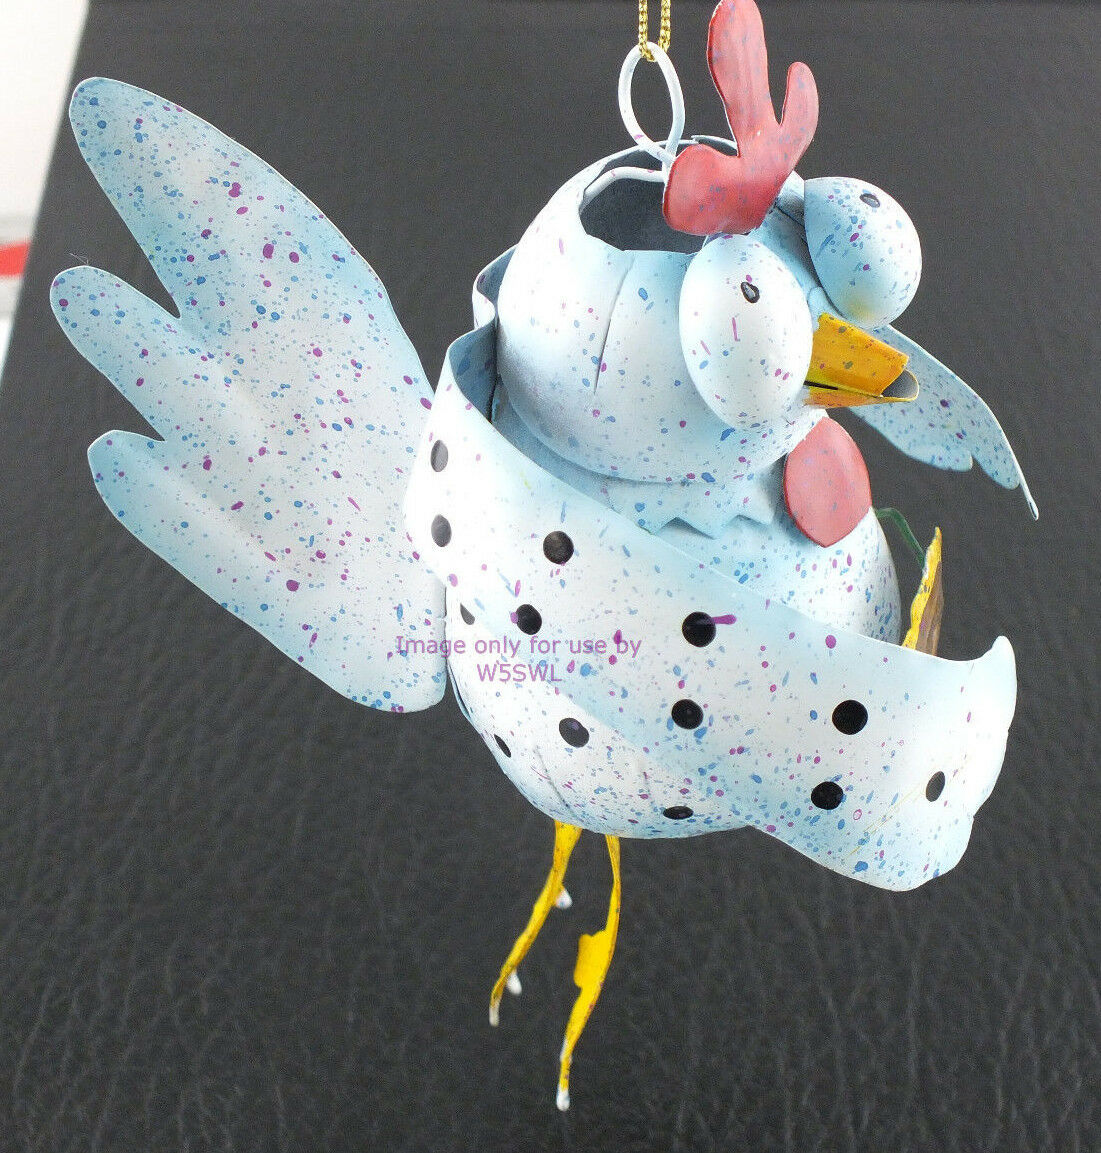 Unique Painted Metal Chicken Critter Decorative Hanging Room Accent Display - Dave's Hobby Shop by W5SWL